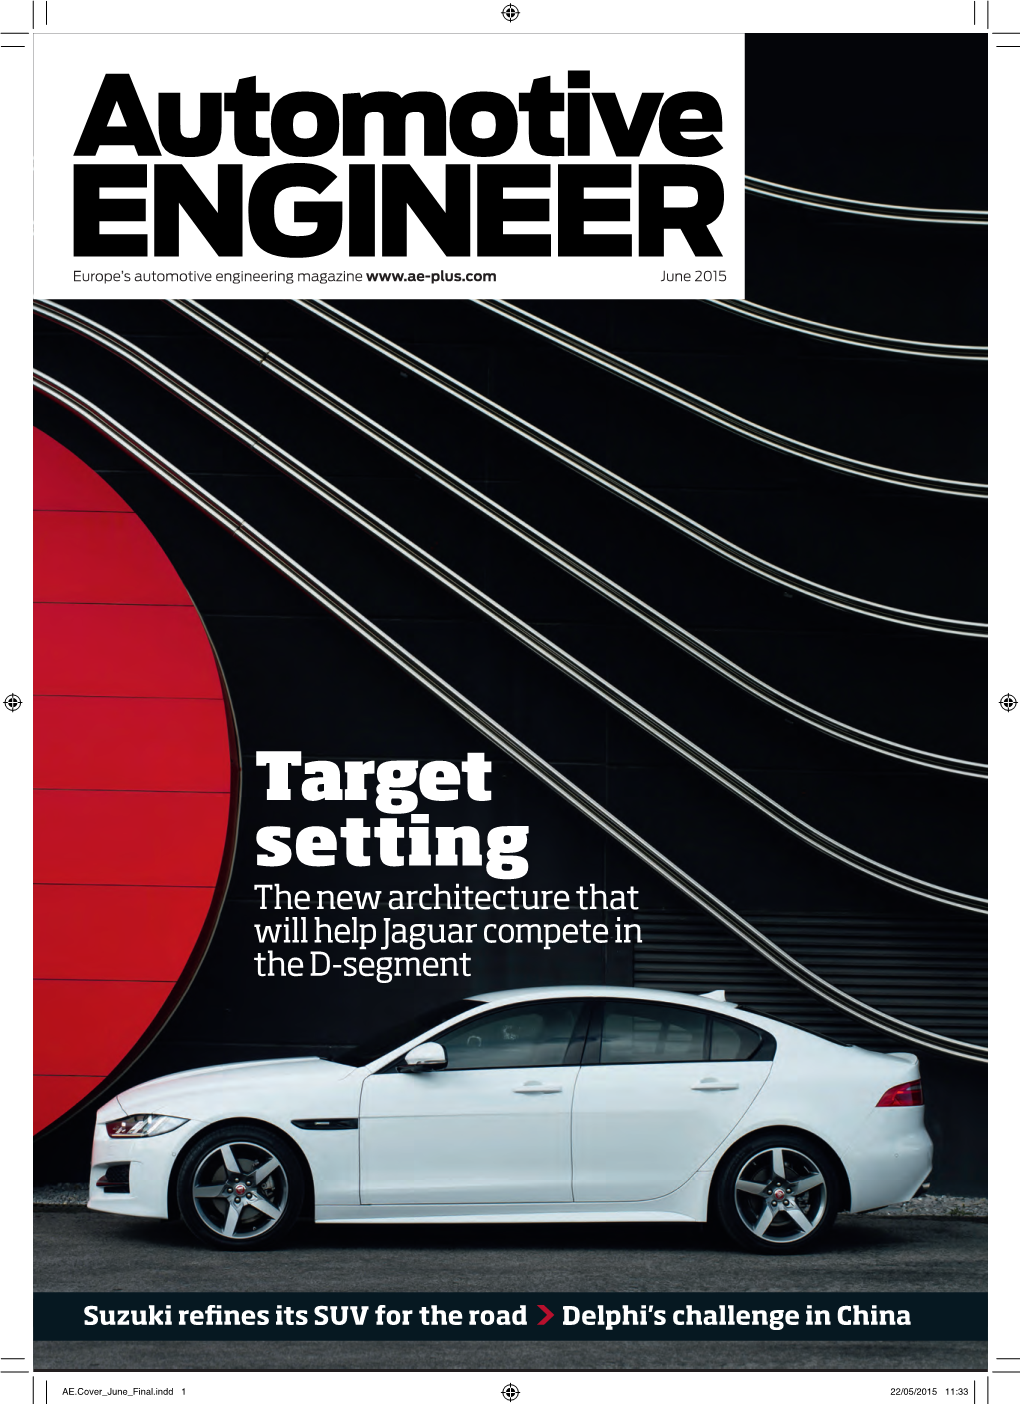 Target Setting the New Architecture That Will Help Jaguar Compete in the D-Segment